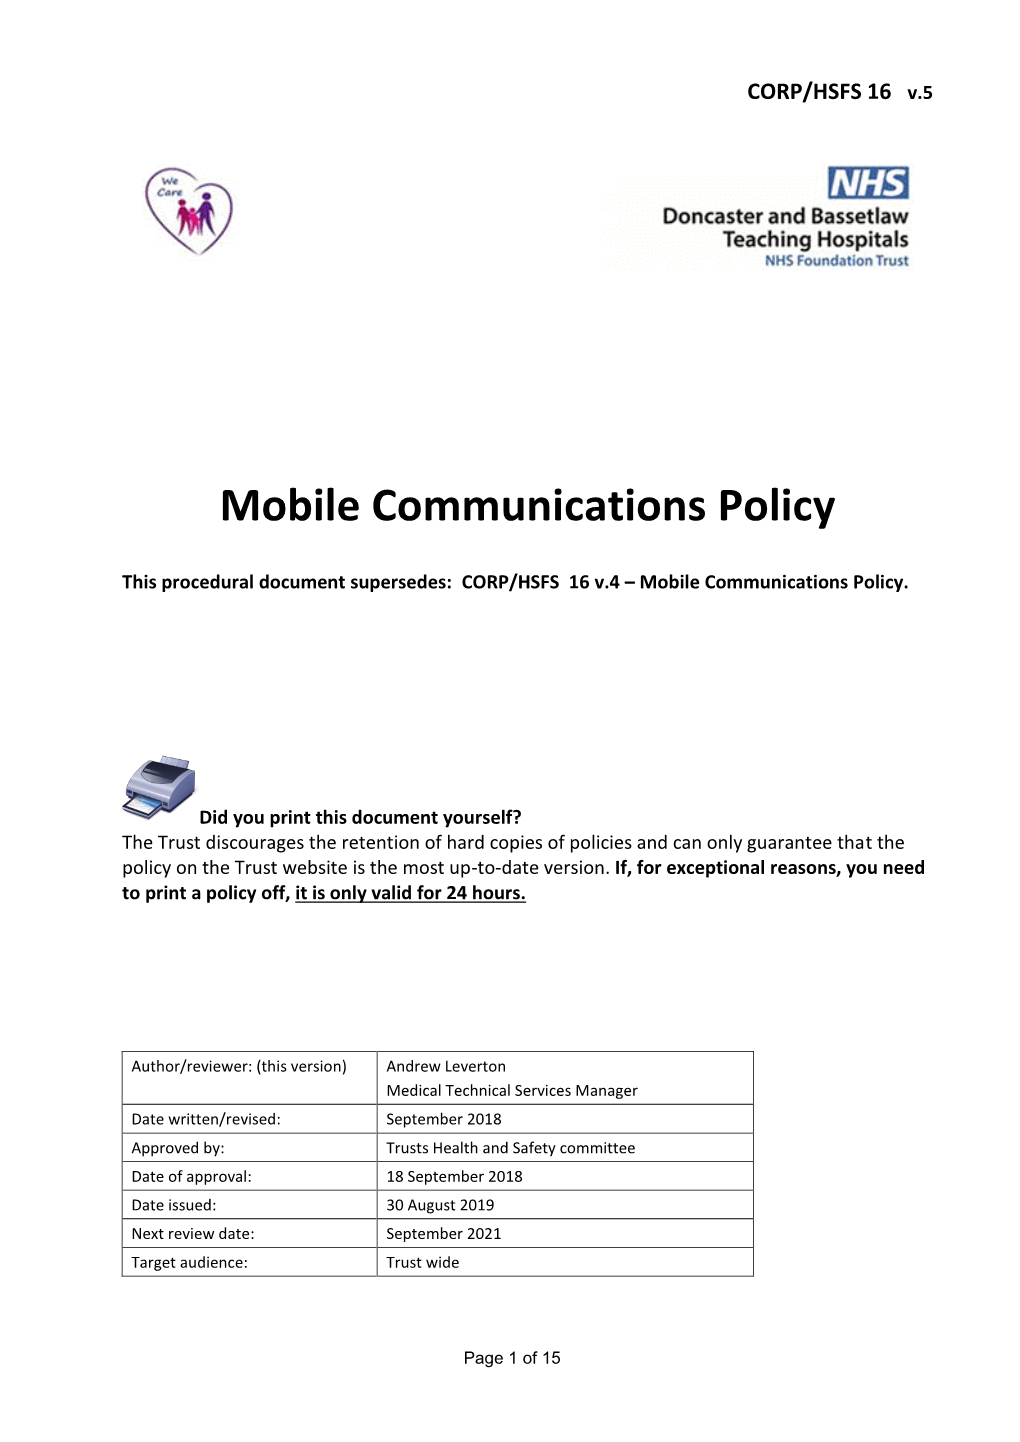 Mobile Communications Policy